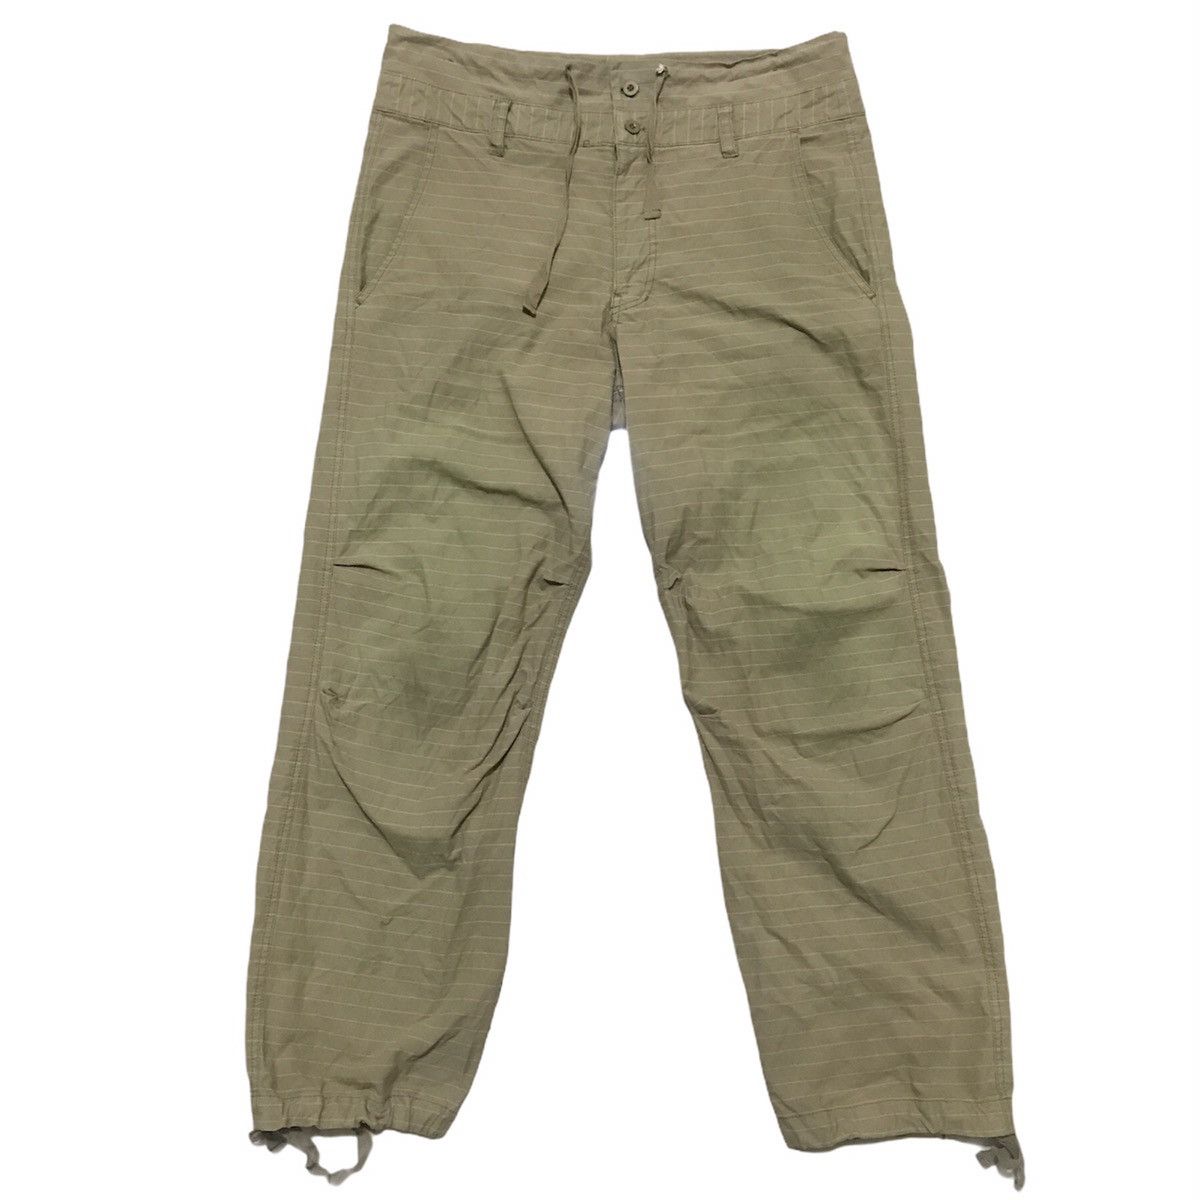 Final Home Military trouser pants - 1